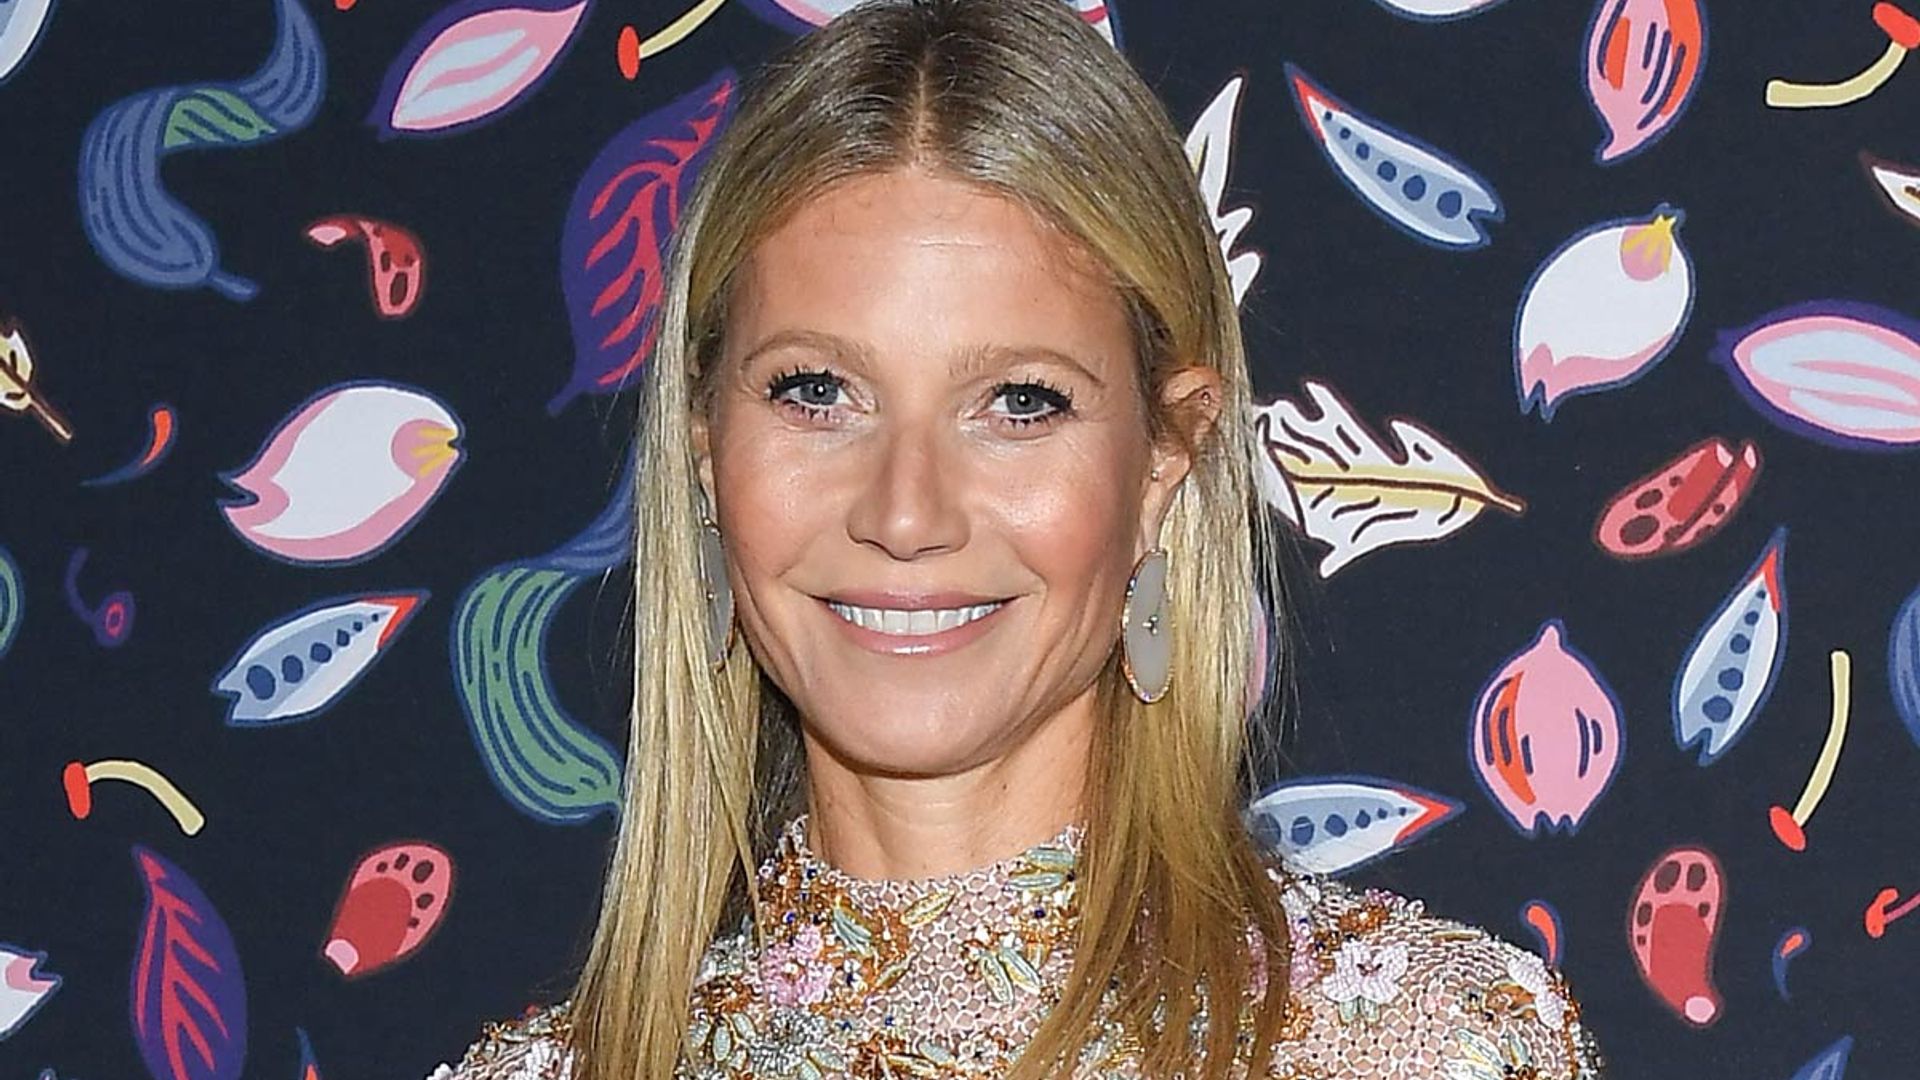 Gwyneth Paltrow shows off her impressive culinary skills with delicious creation